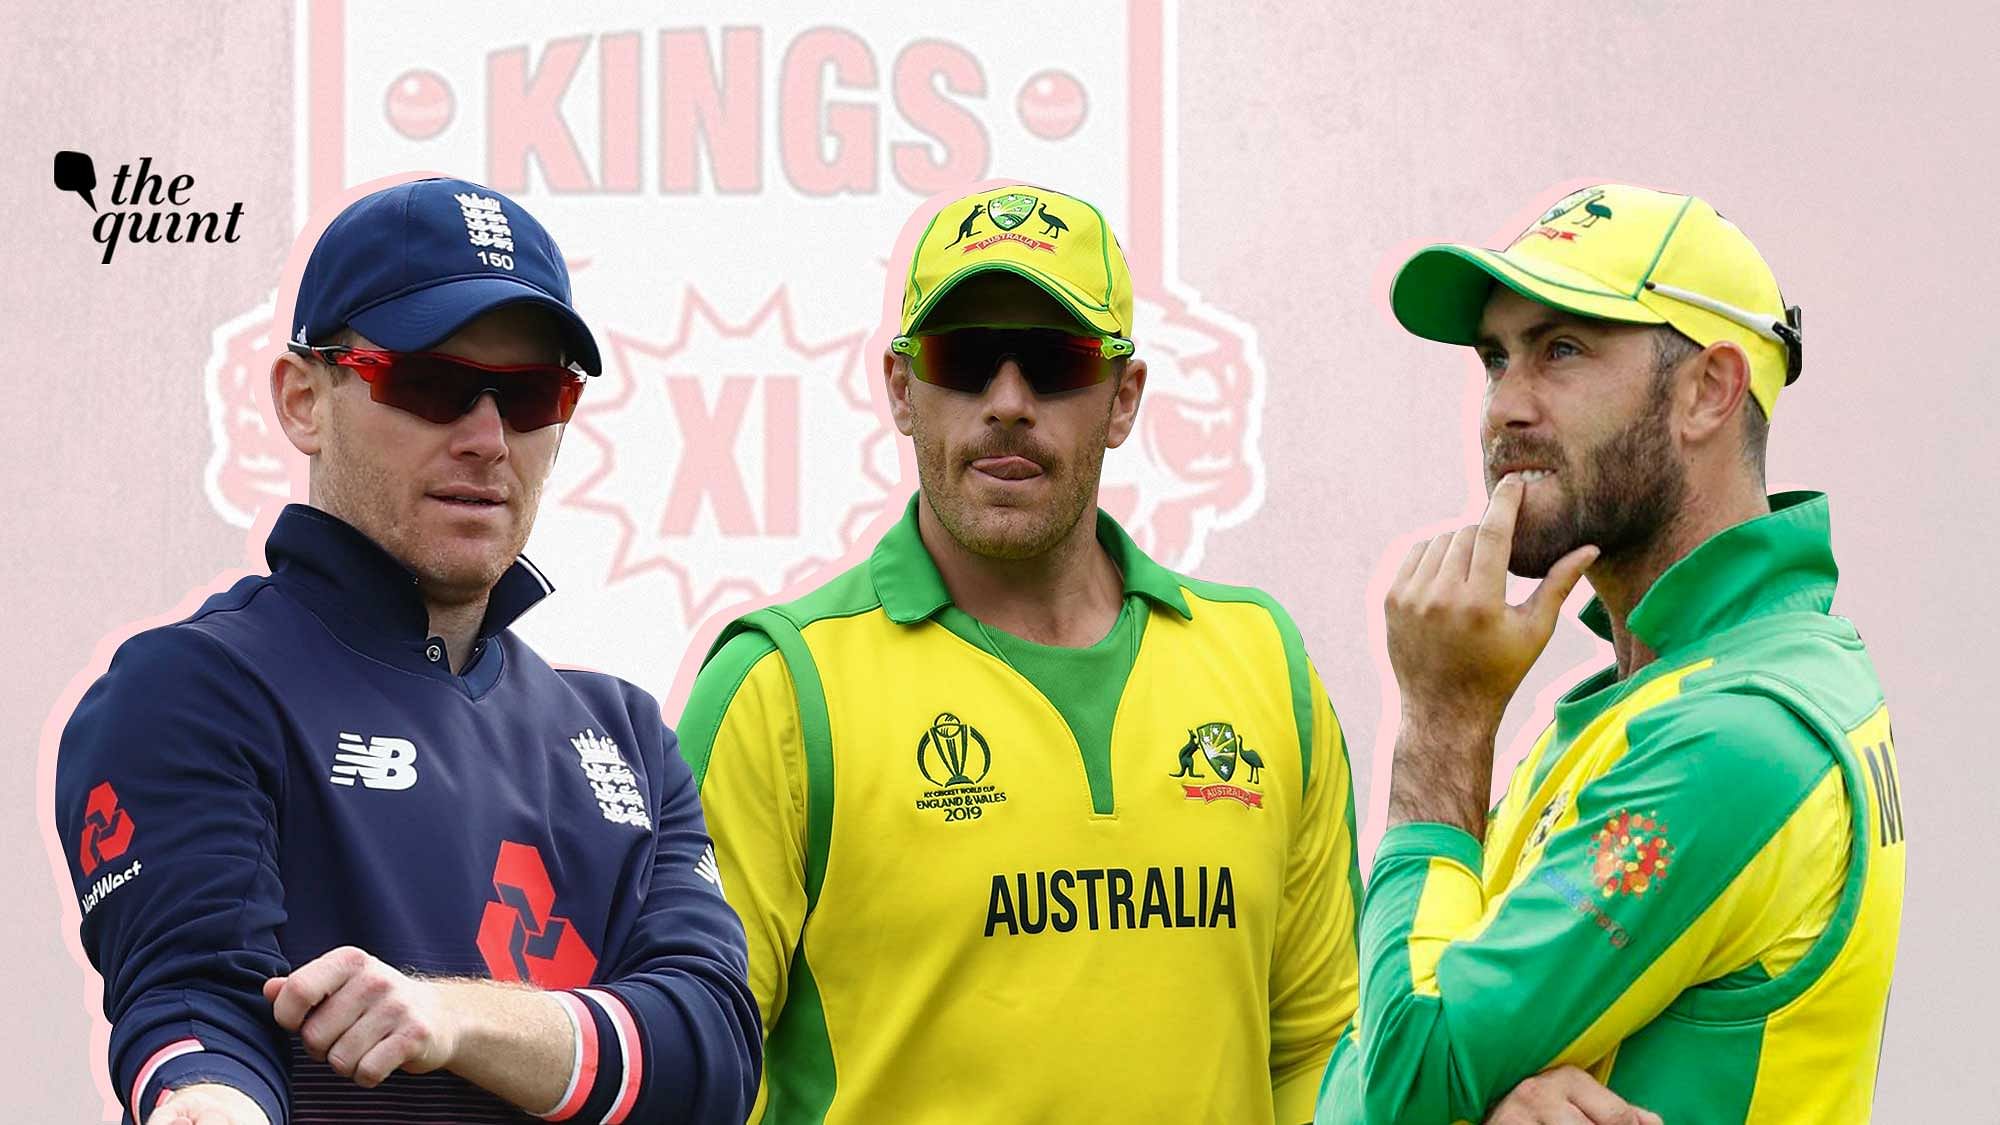 Eoin Morgan (left), Aaron Finch (middle) and Glenn Maxwell might be probable options for Kings XI Punjab to lead them in the upcoming IPL season.